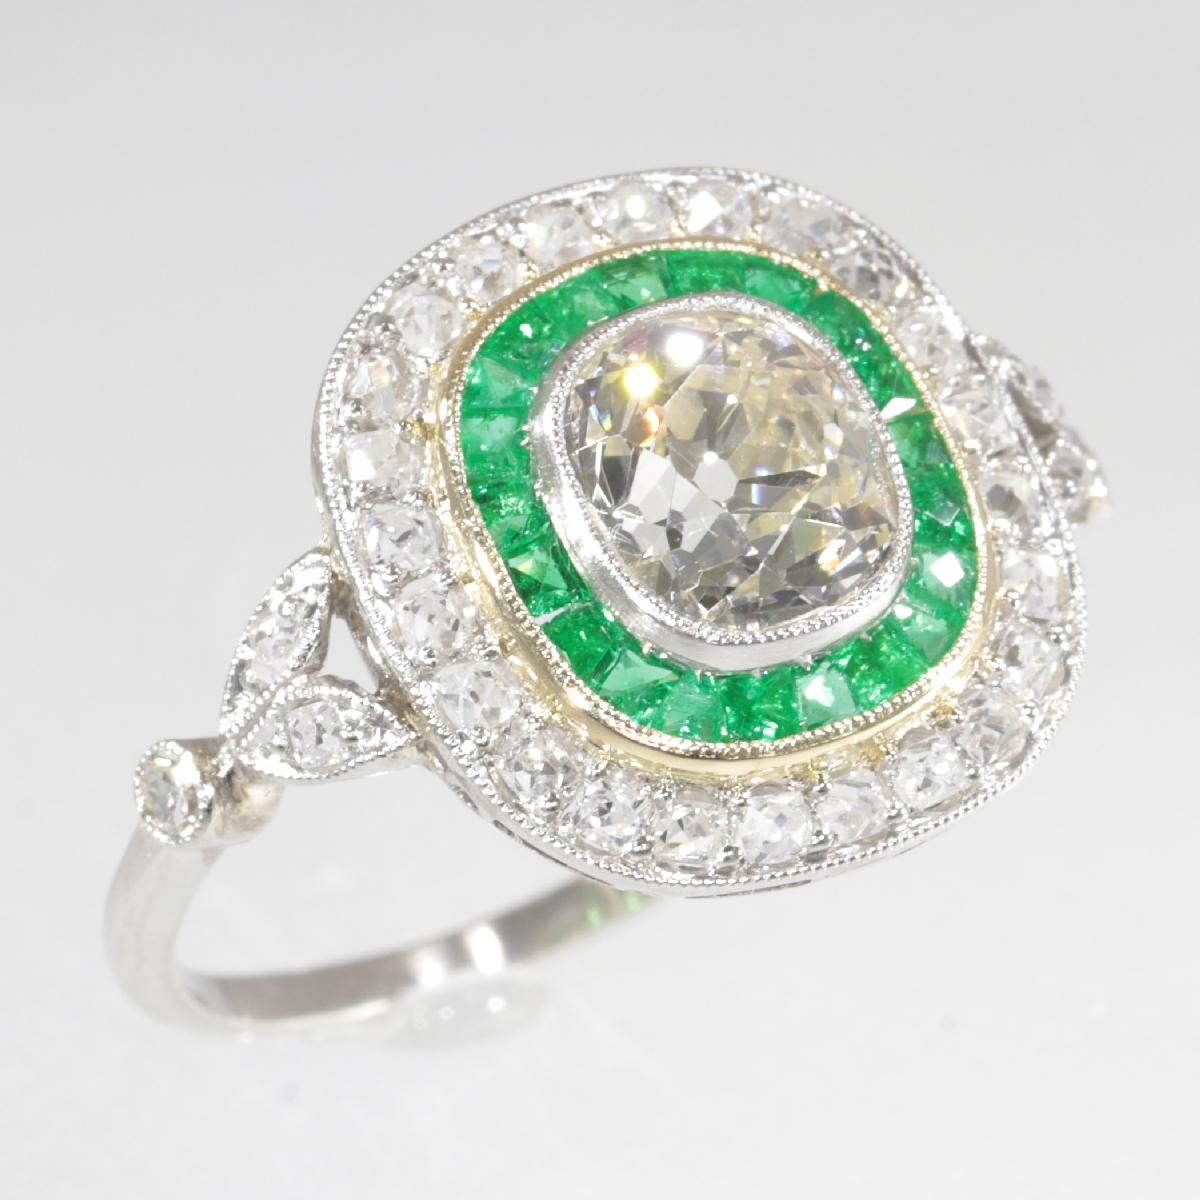 Stunning Vintage Art Deco Style Large Diamond and Emerald Engagement Ring, 1930s For Sale 3